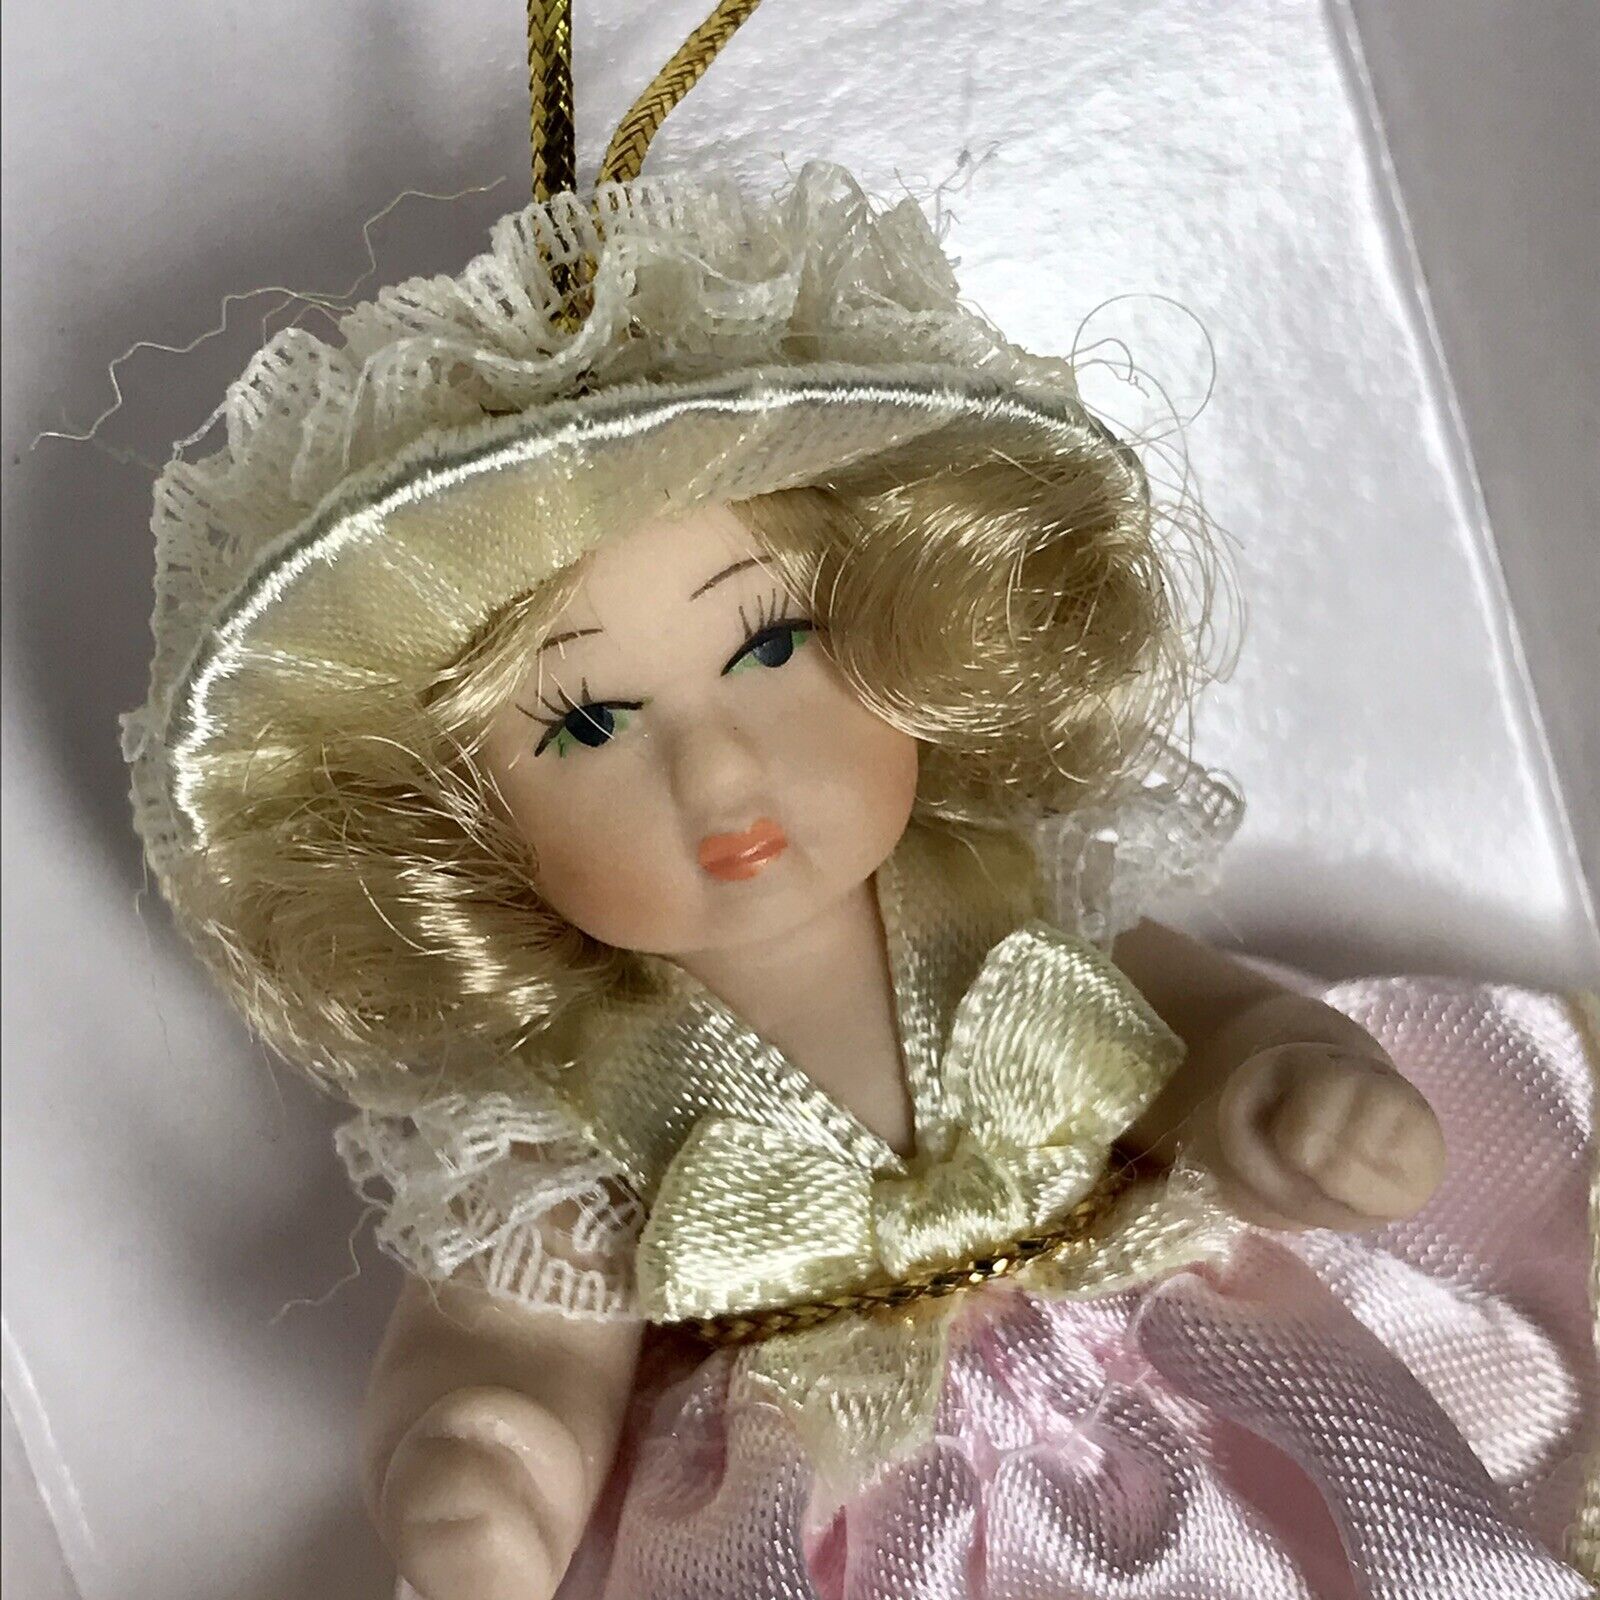 VTG DG Creations Porcelain Collectible Poseable Doll Ornament 2003 Pink Dress